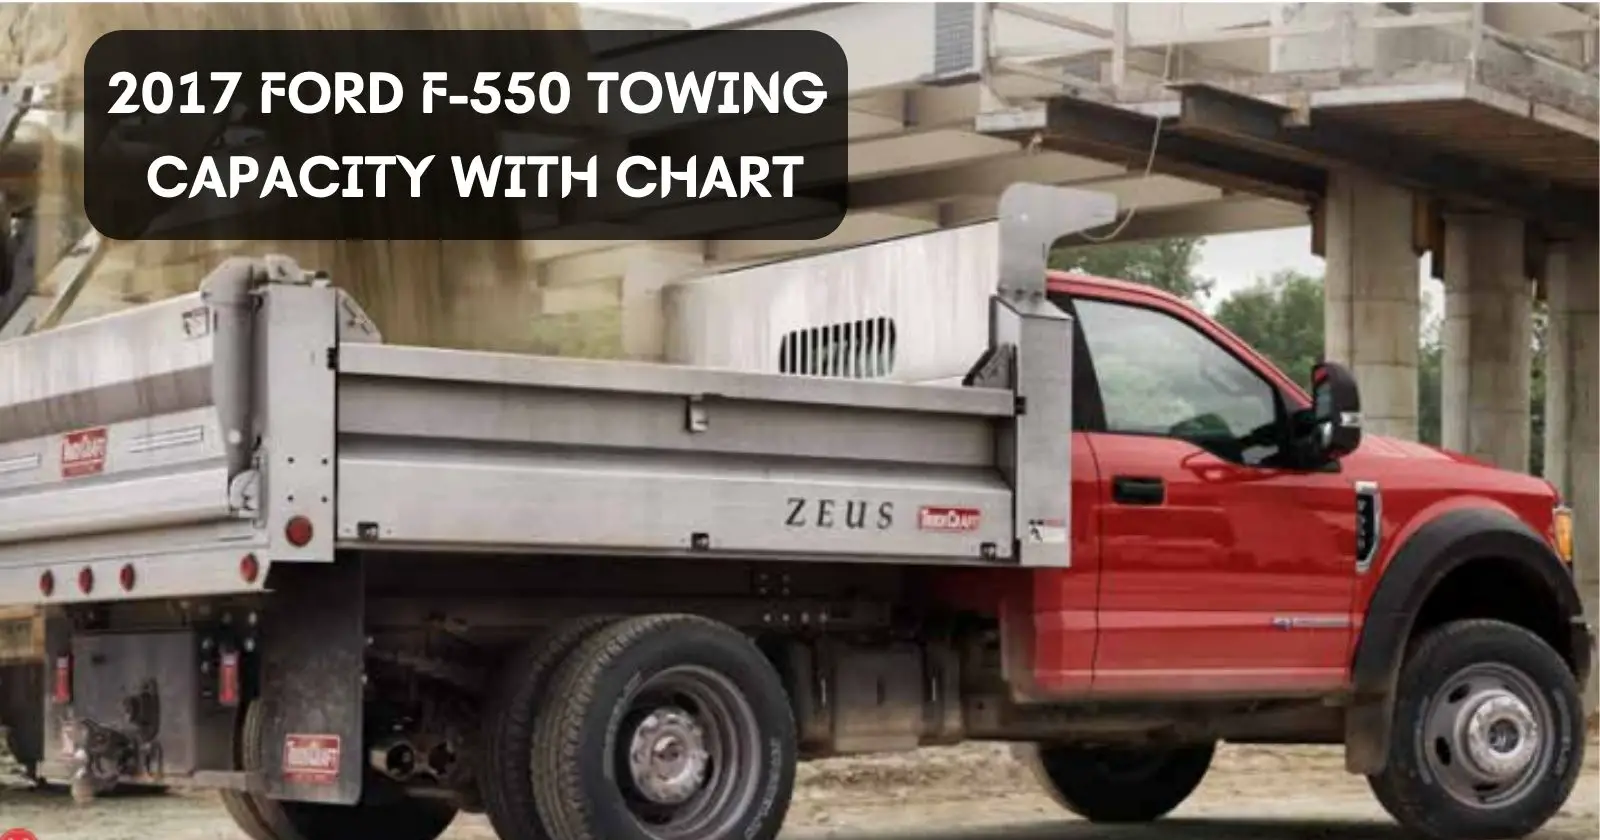 2017-ford-f-550-towing-capacity-with-chart-thecartowing